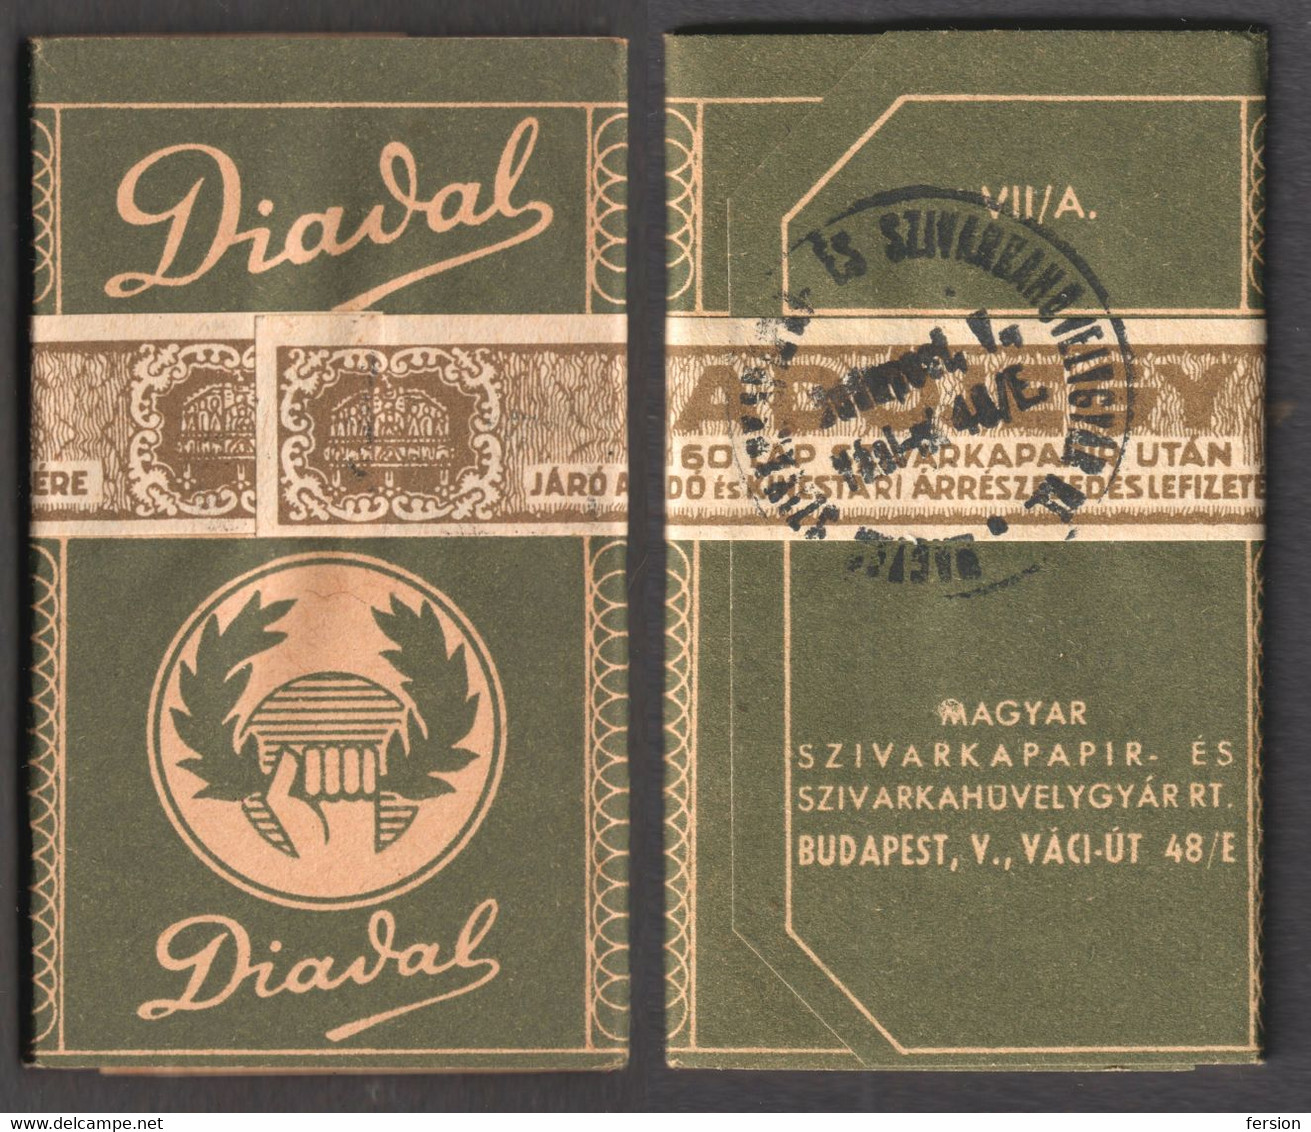 REVENUE Seal Fiscal Tax Stripe Hungary CIGARETTE TOBACCO Paper Package LABEL Cover DIADAL VICTORY 1930 UNUSED Full Paper - Fiscales